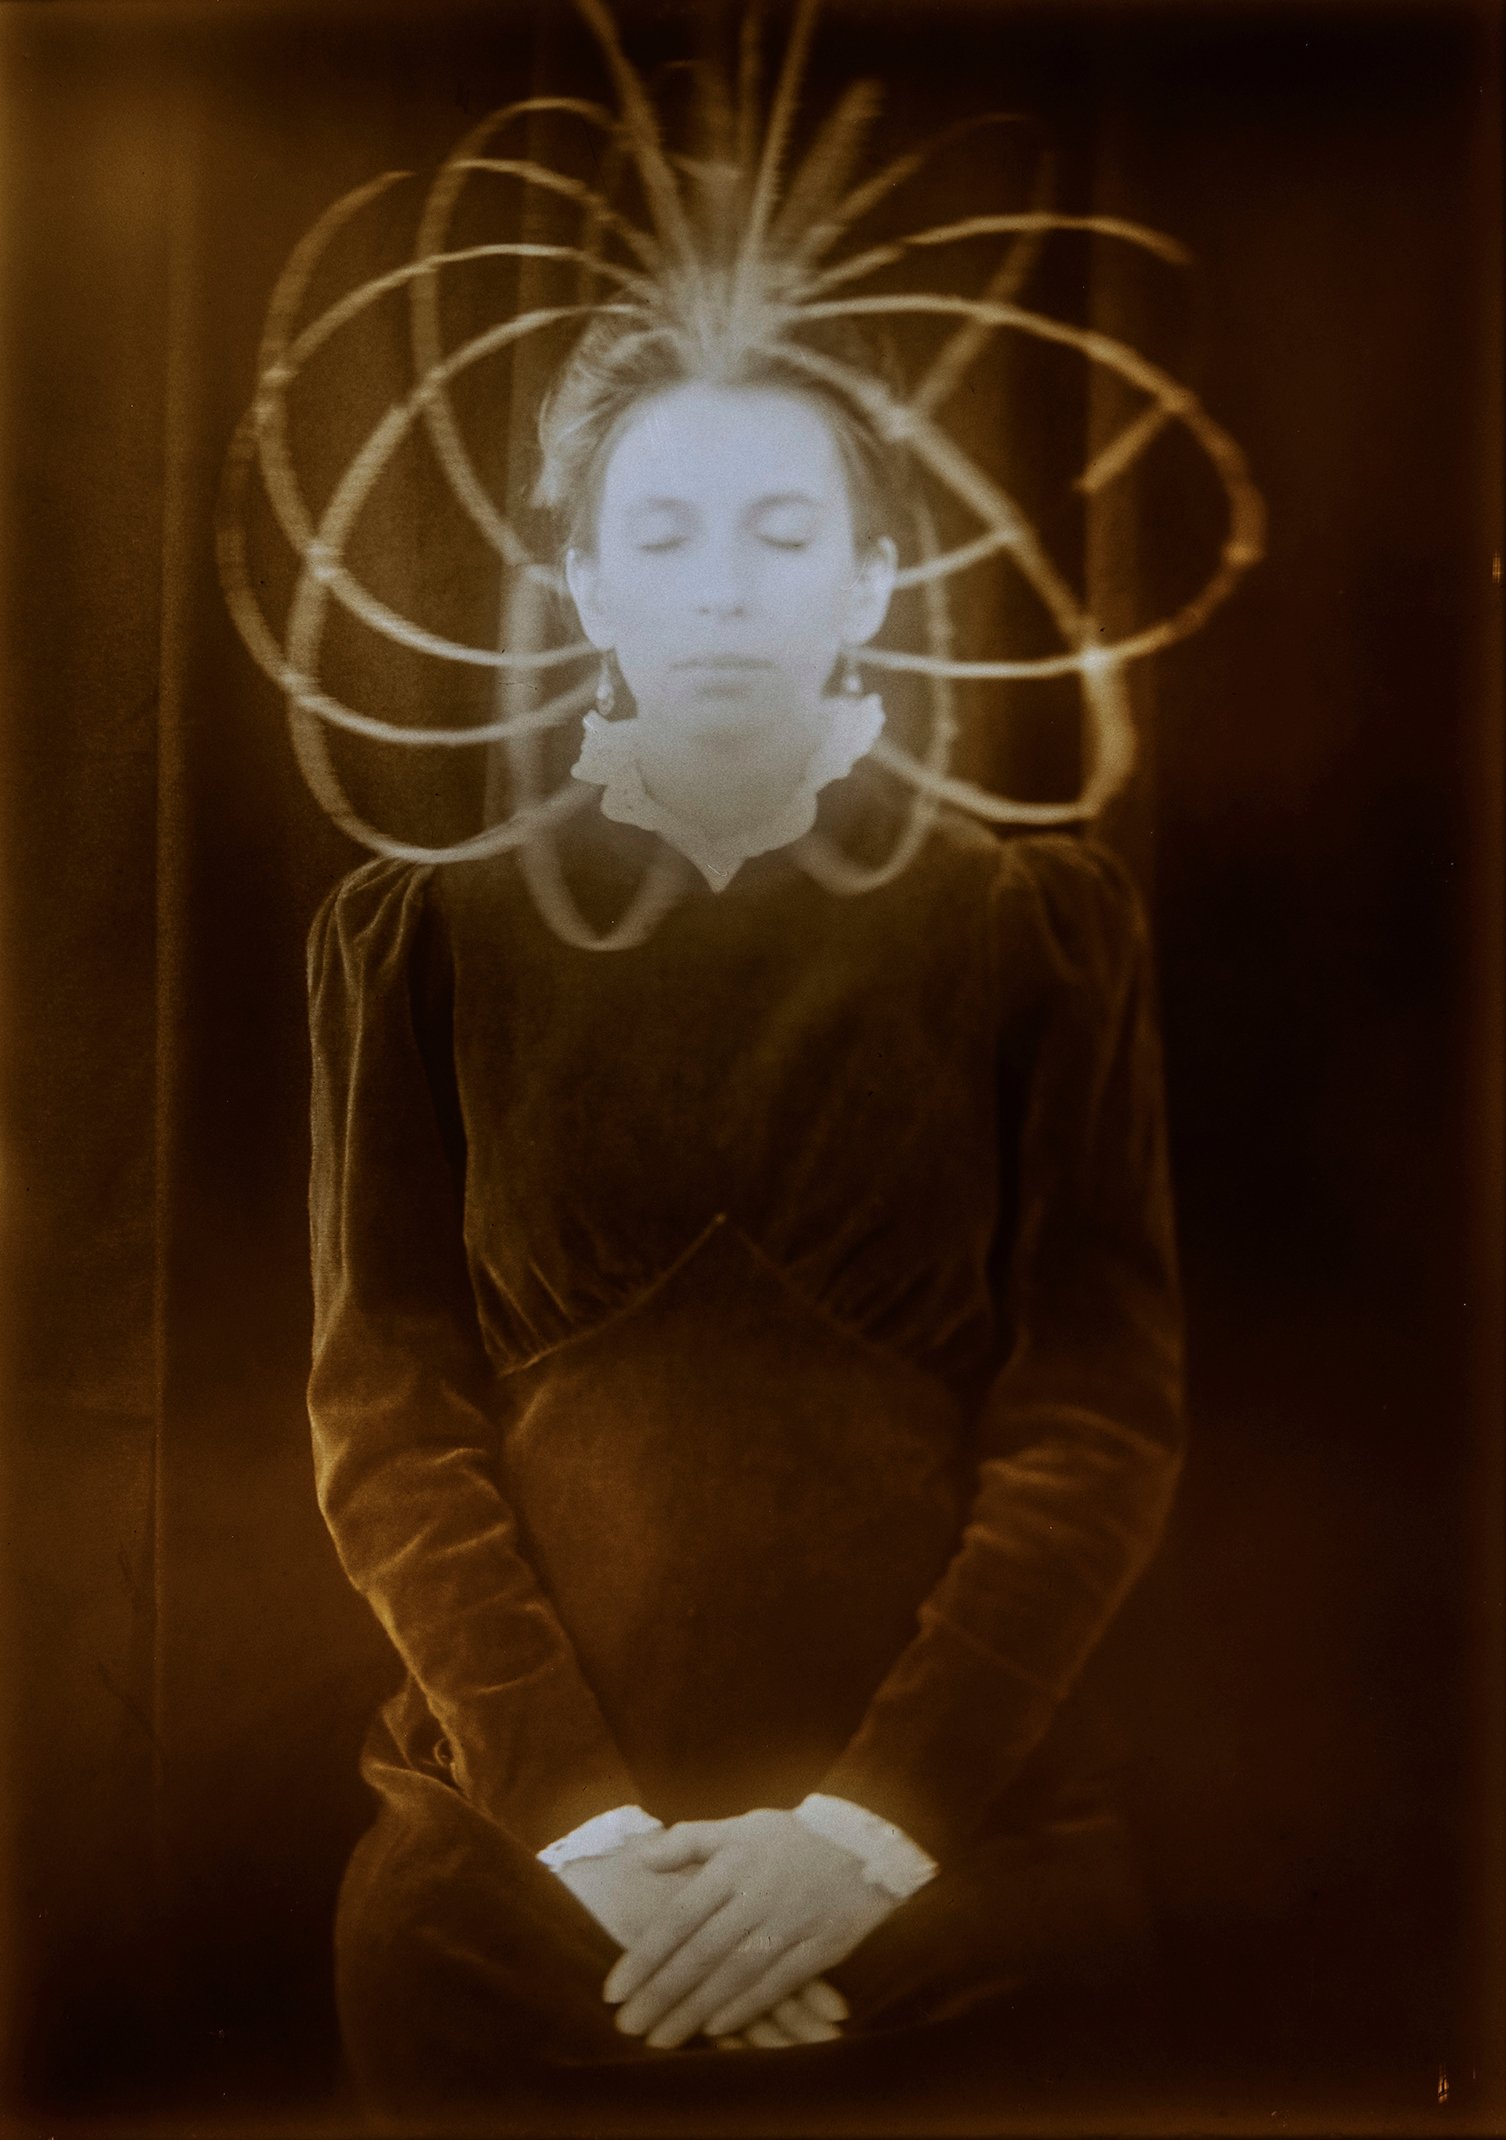 The Electrical Body, 2021. Elizaveta Dmitrievna came into contact with a spirit who taught her how to achieve “an electrical body”: to reach a state of consciousness that enables the comprehension of higher worlds